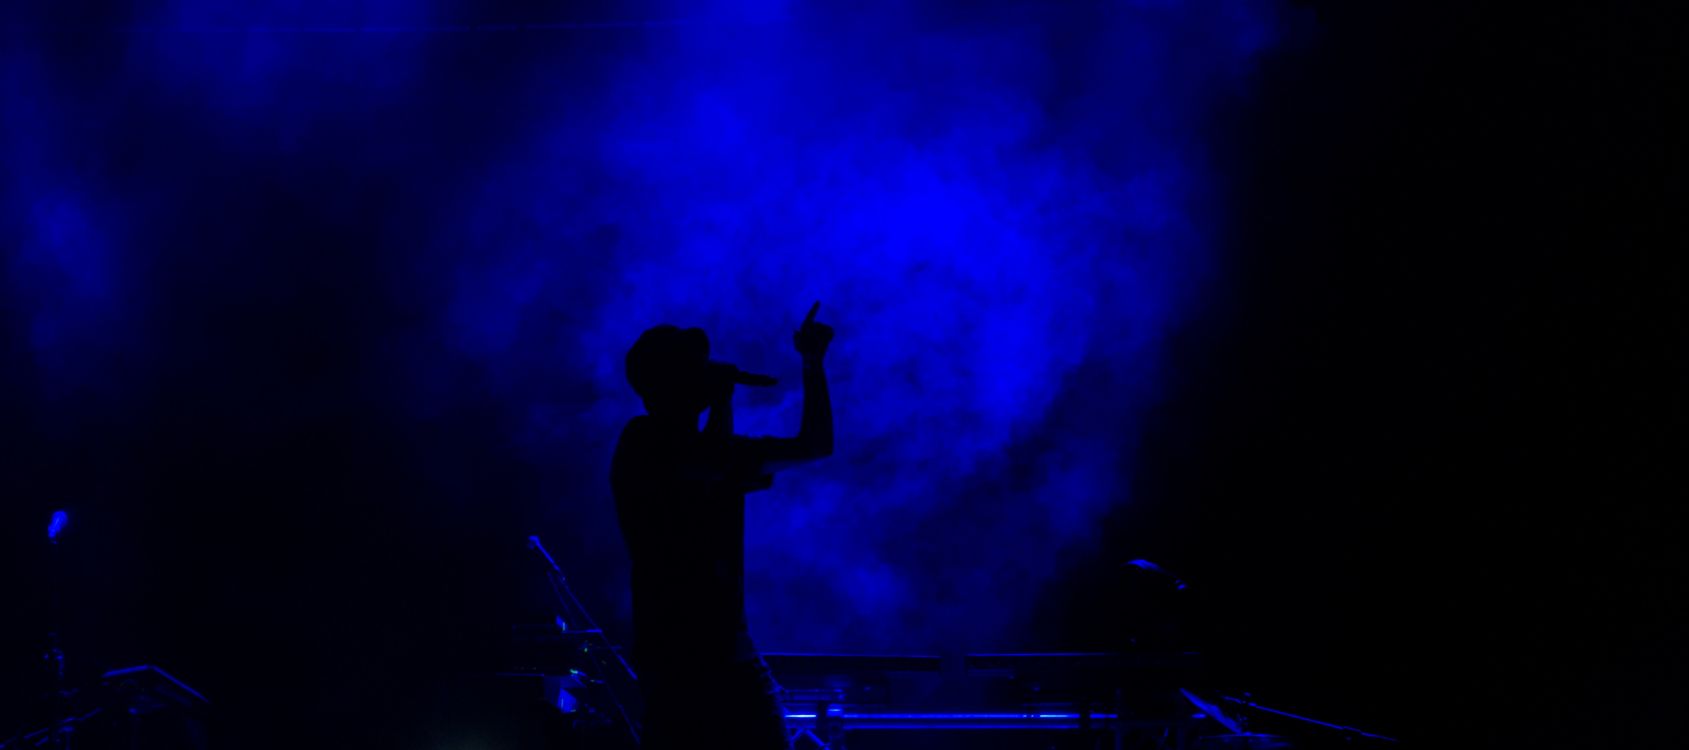 Singer Silhouette, Performance, Blue, Entertainment, Performing Arts. Wallpaper in 4644x2062 Resolution